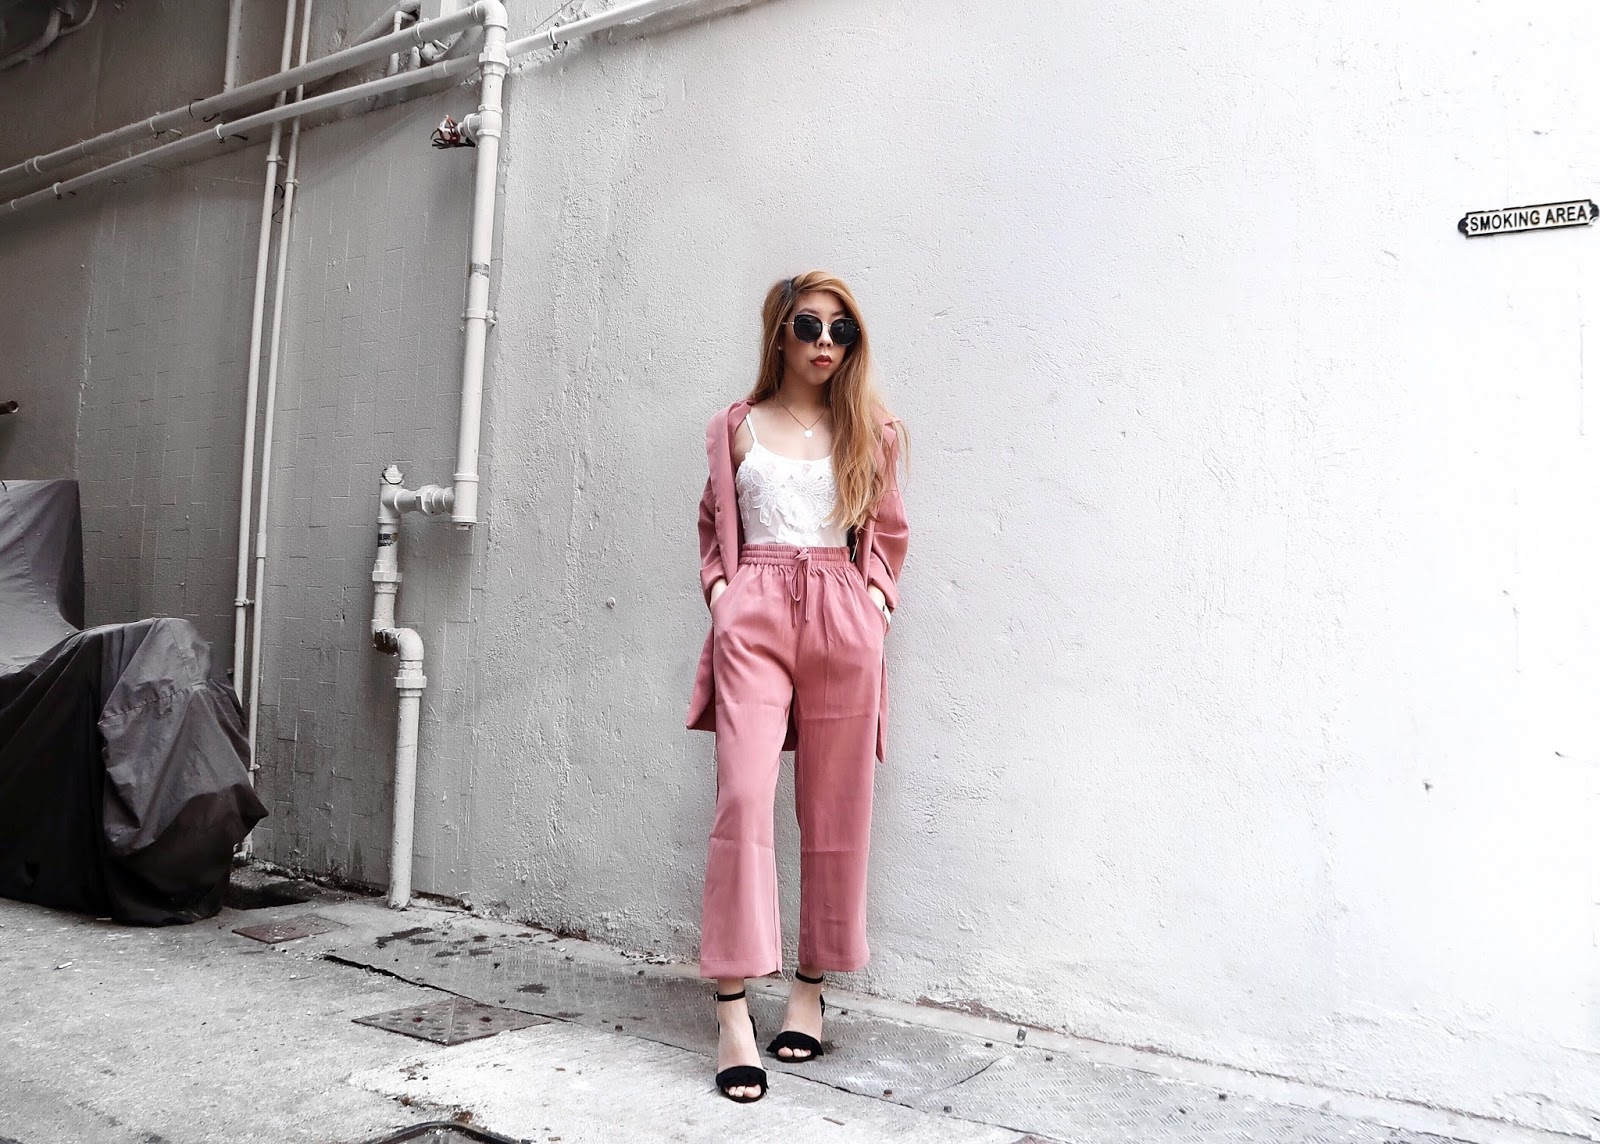 Boohoo White Lingerie and Black Sandals, Yesstyle Pink Pantsuit